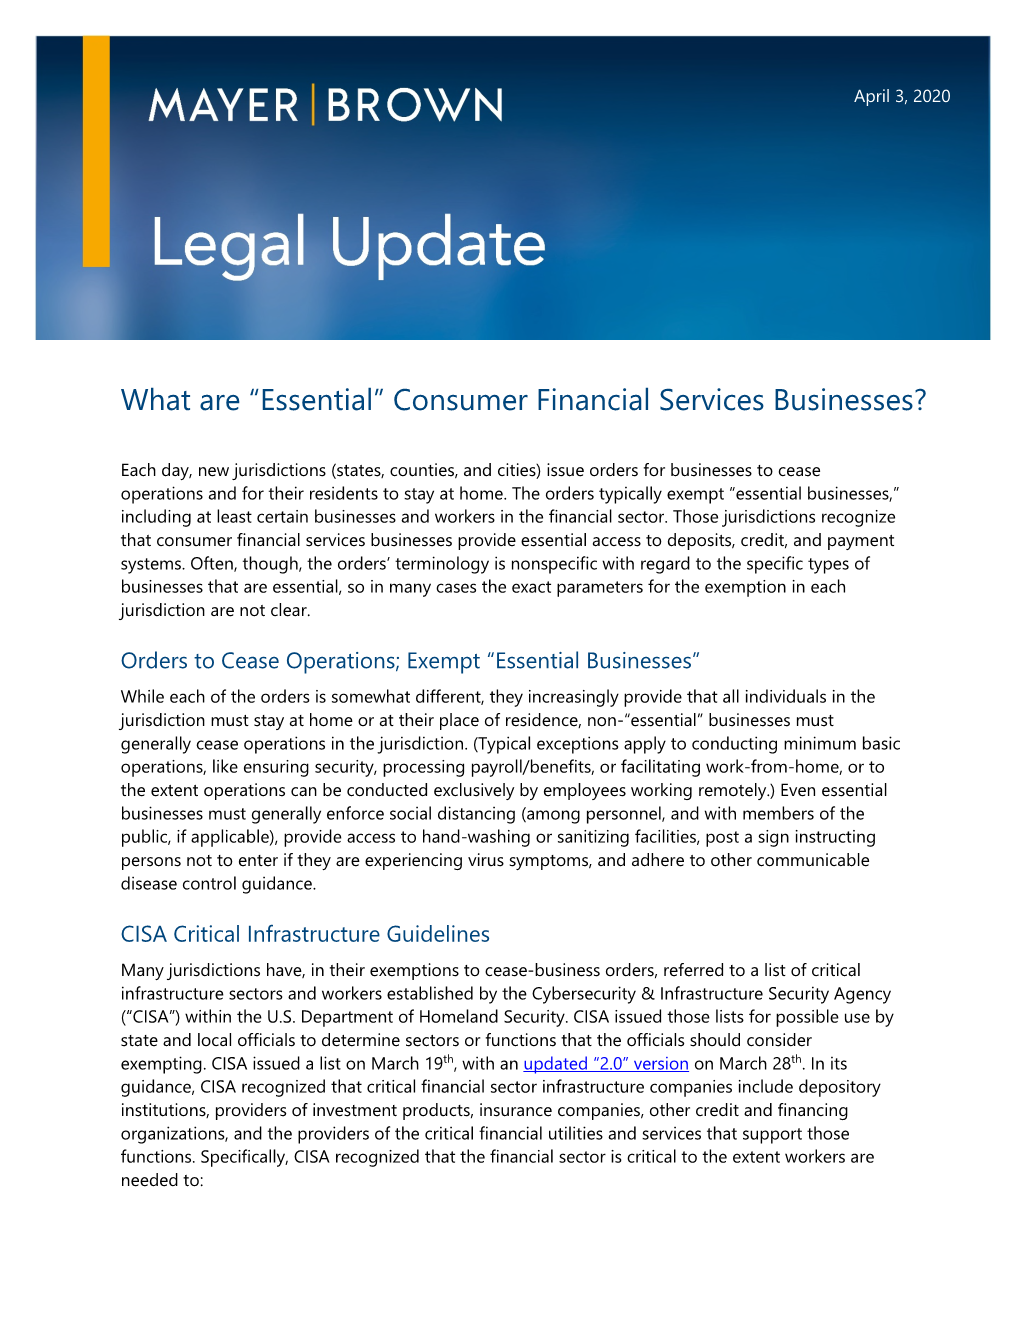 What Are “Essential” Consumer Financial Services Businesses?